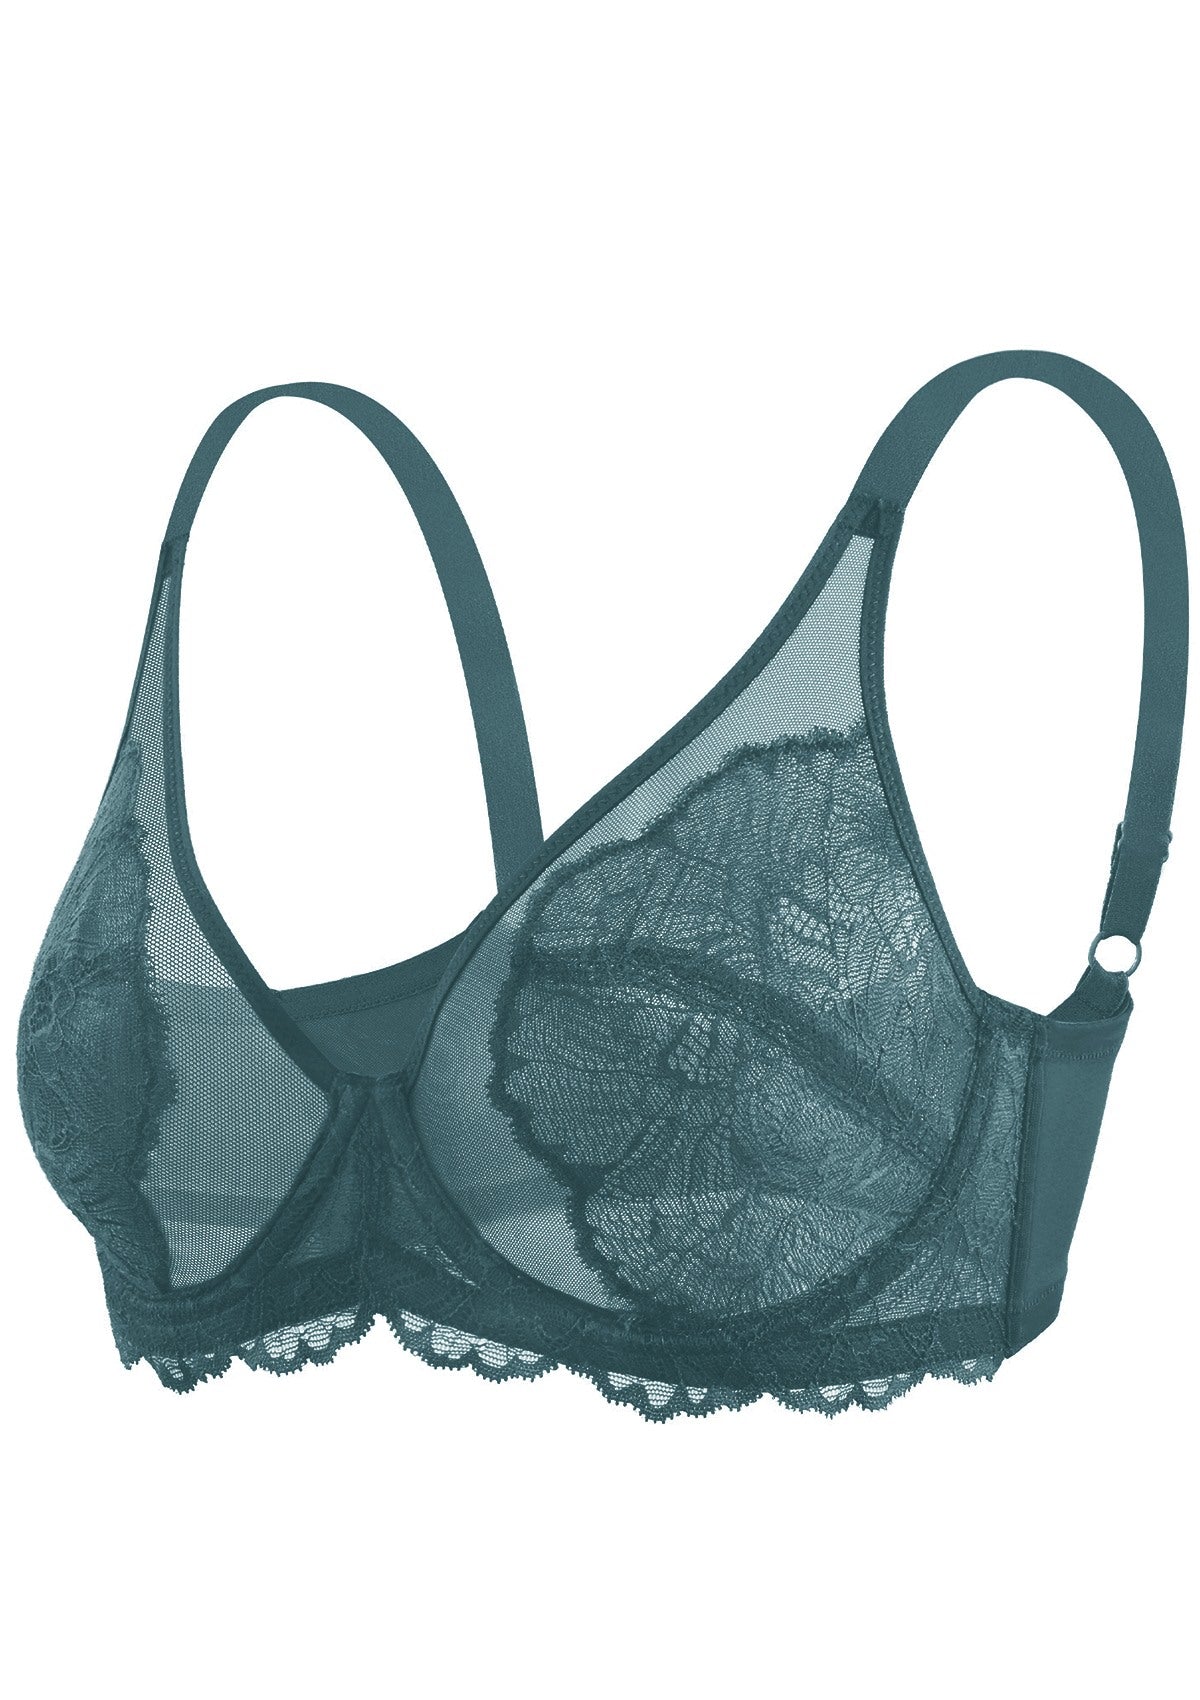 HSIA Blossom Full Figure See-Through Lace Bra For Side And Back Fat - Dark Blue / 36 / DDD/F